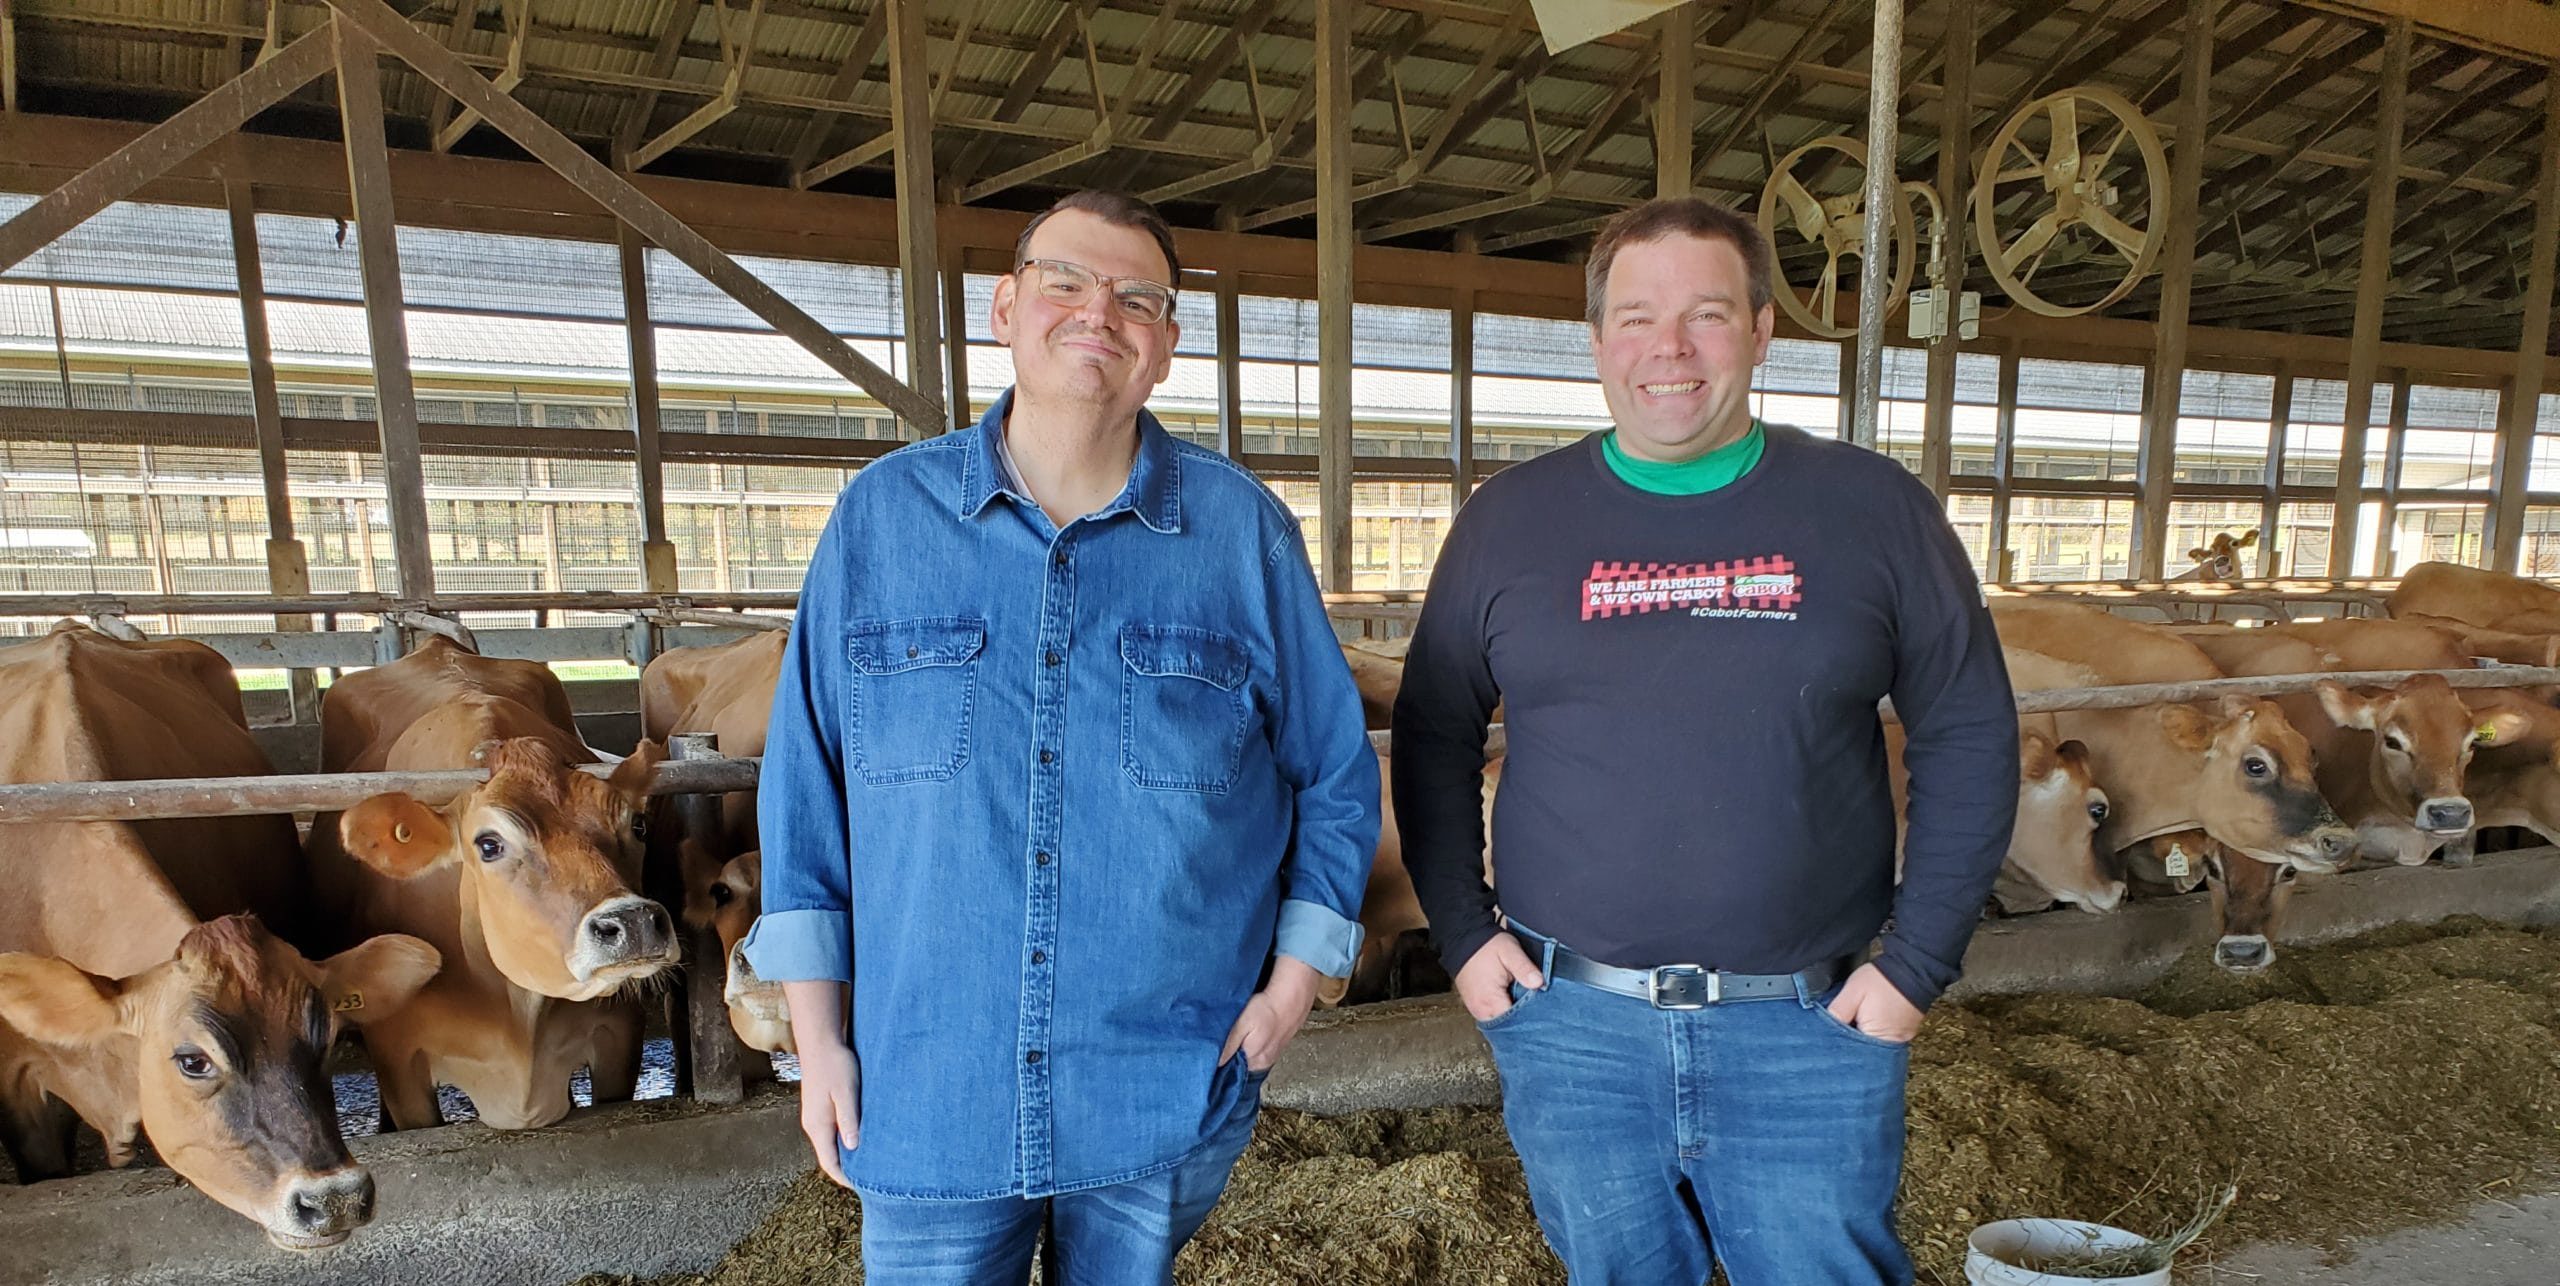 New York Dairy Farmer Gives Celebrity Chef Personal Tour to Strengthen Connections with Consumers